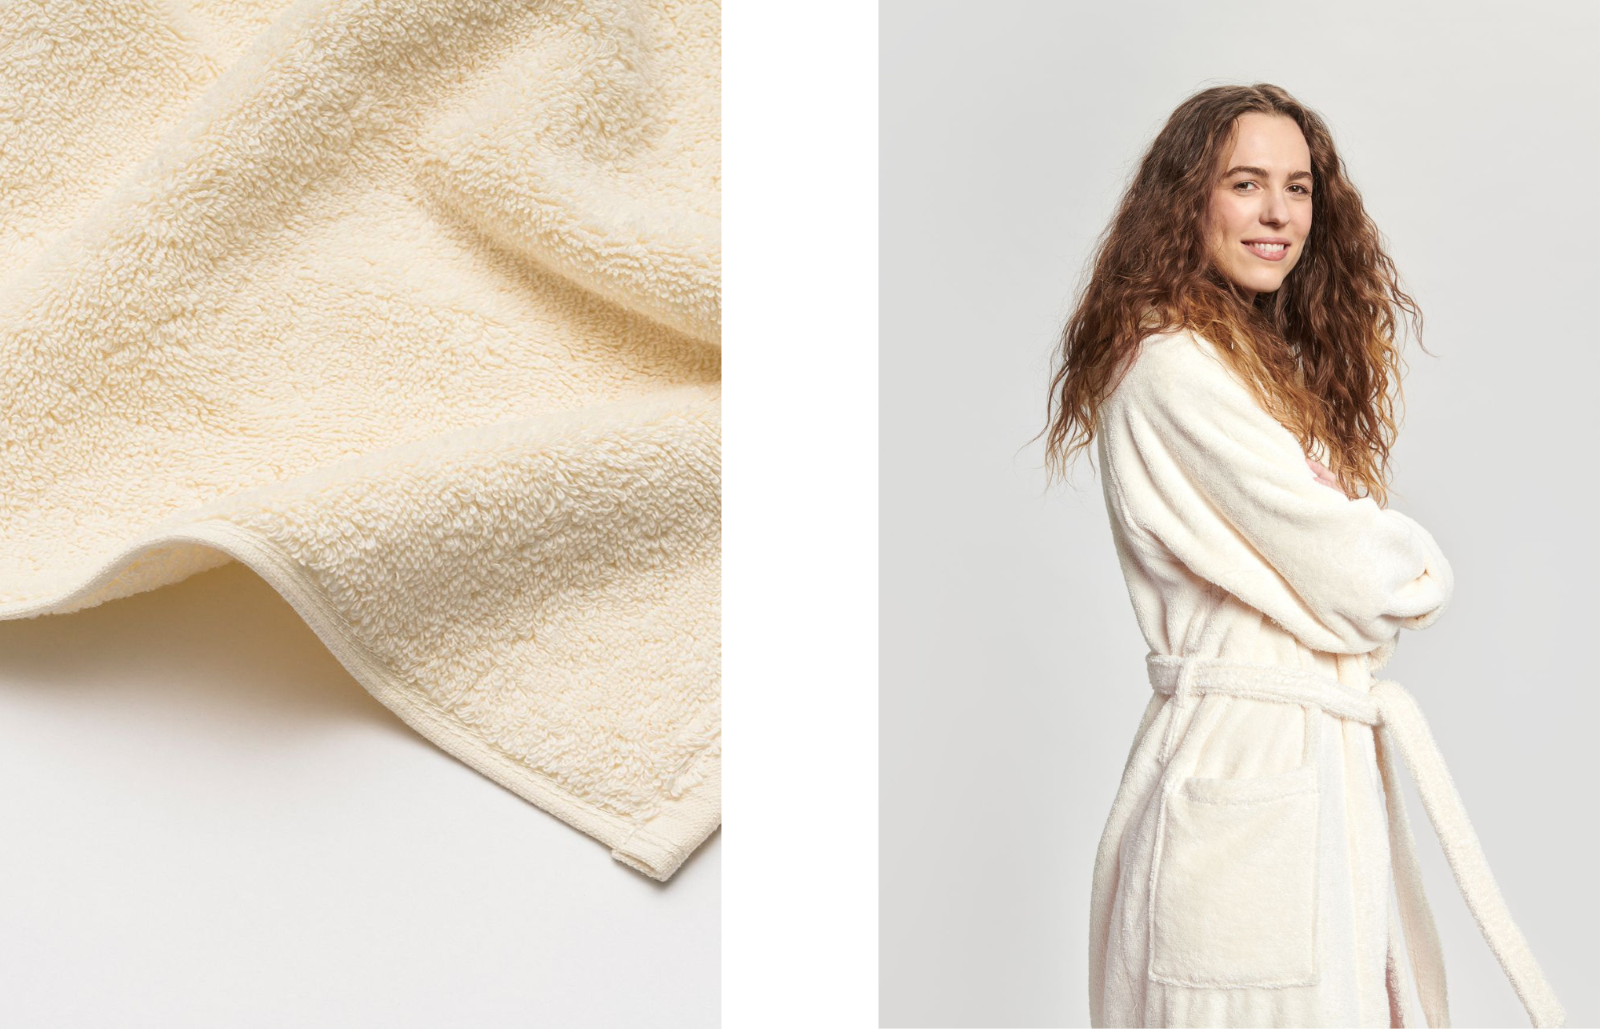 Our cream Honest Cotton towel, Naive Vanilla bathrobe and Flat White bed linen all feature the Pantone shade 11-0515 TPG.